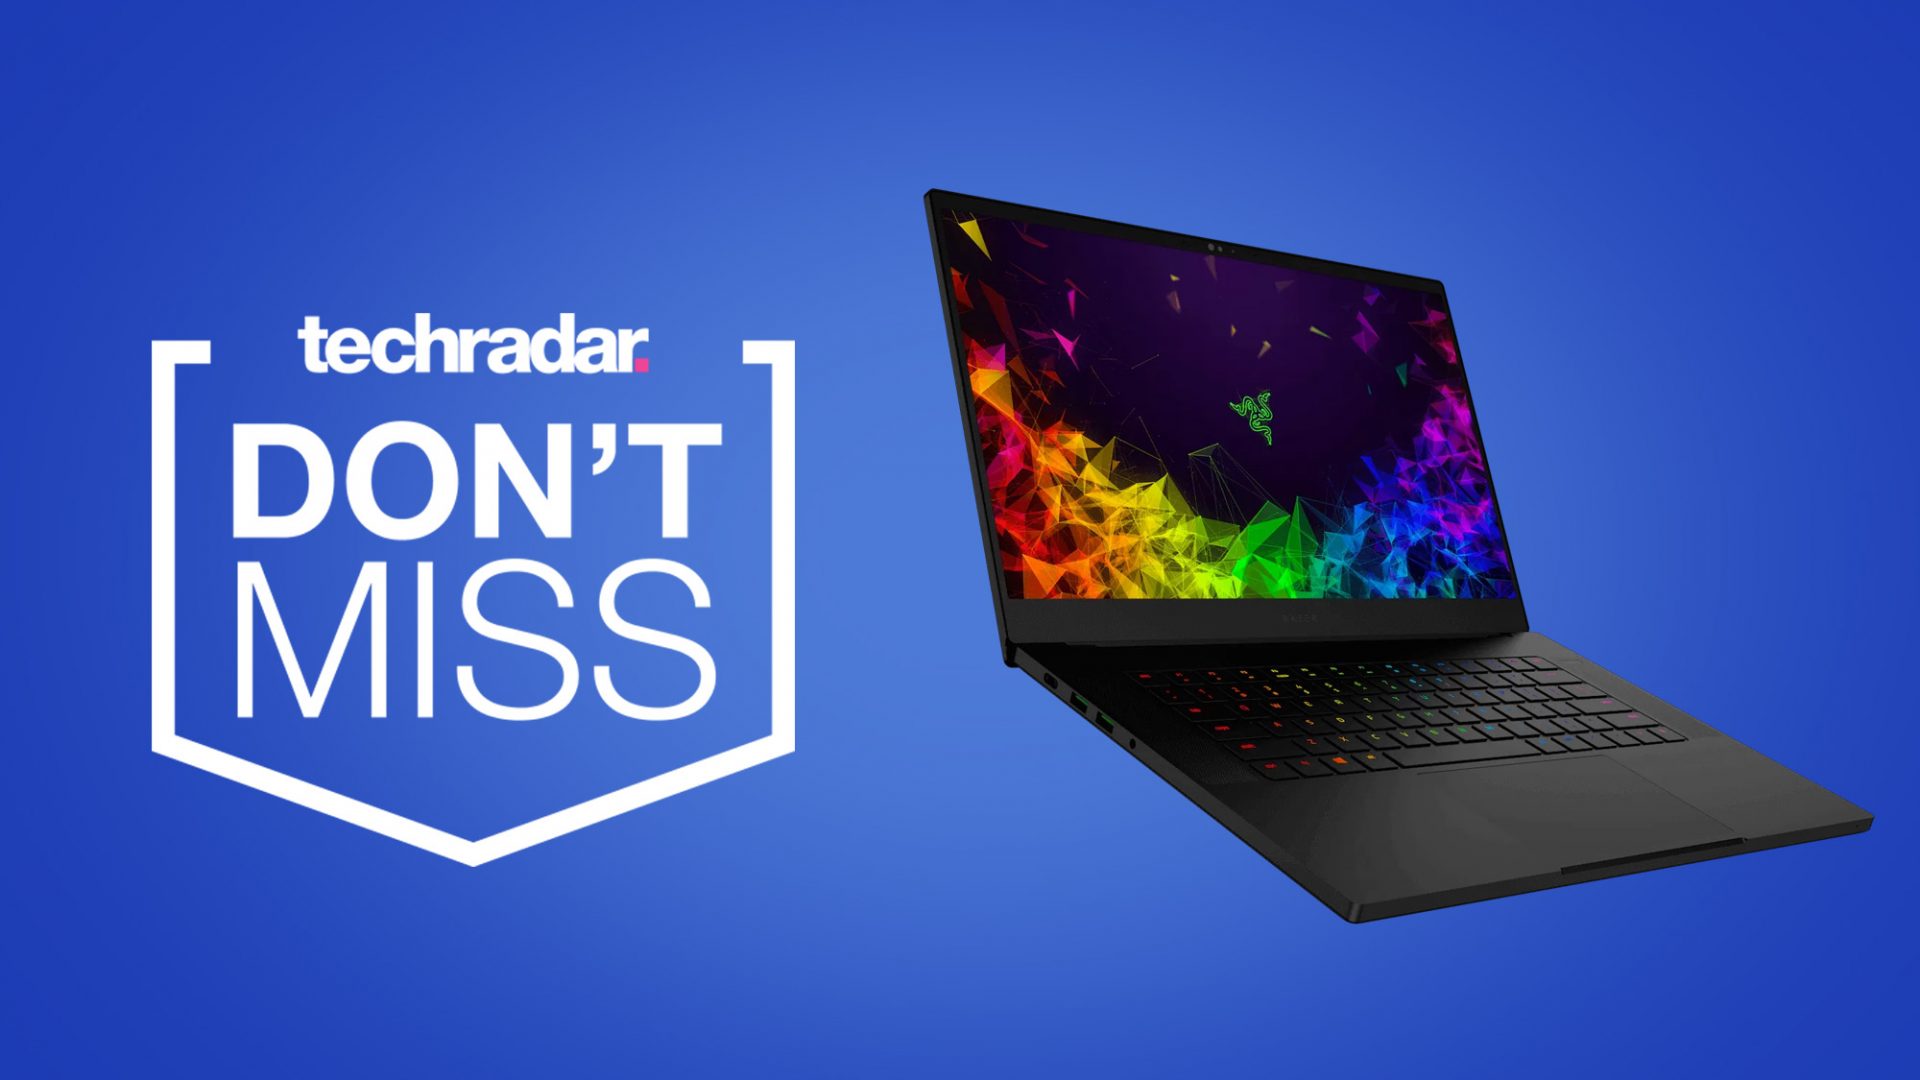 Set up up to $300 with these Razer Blade gaming laptop deals